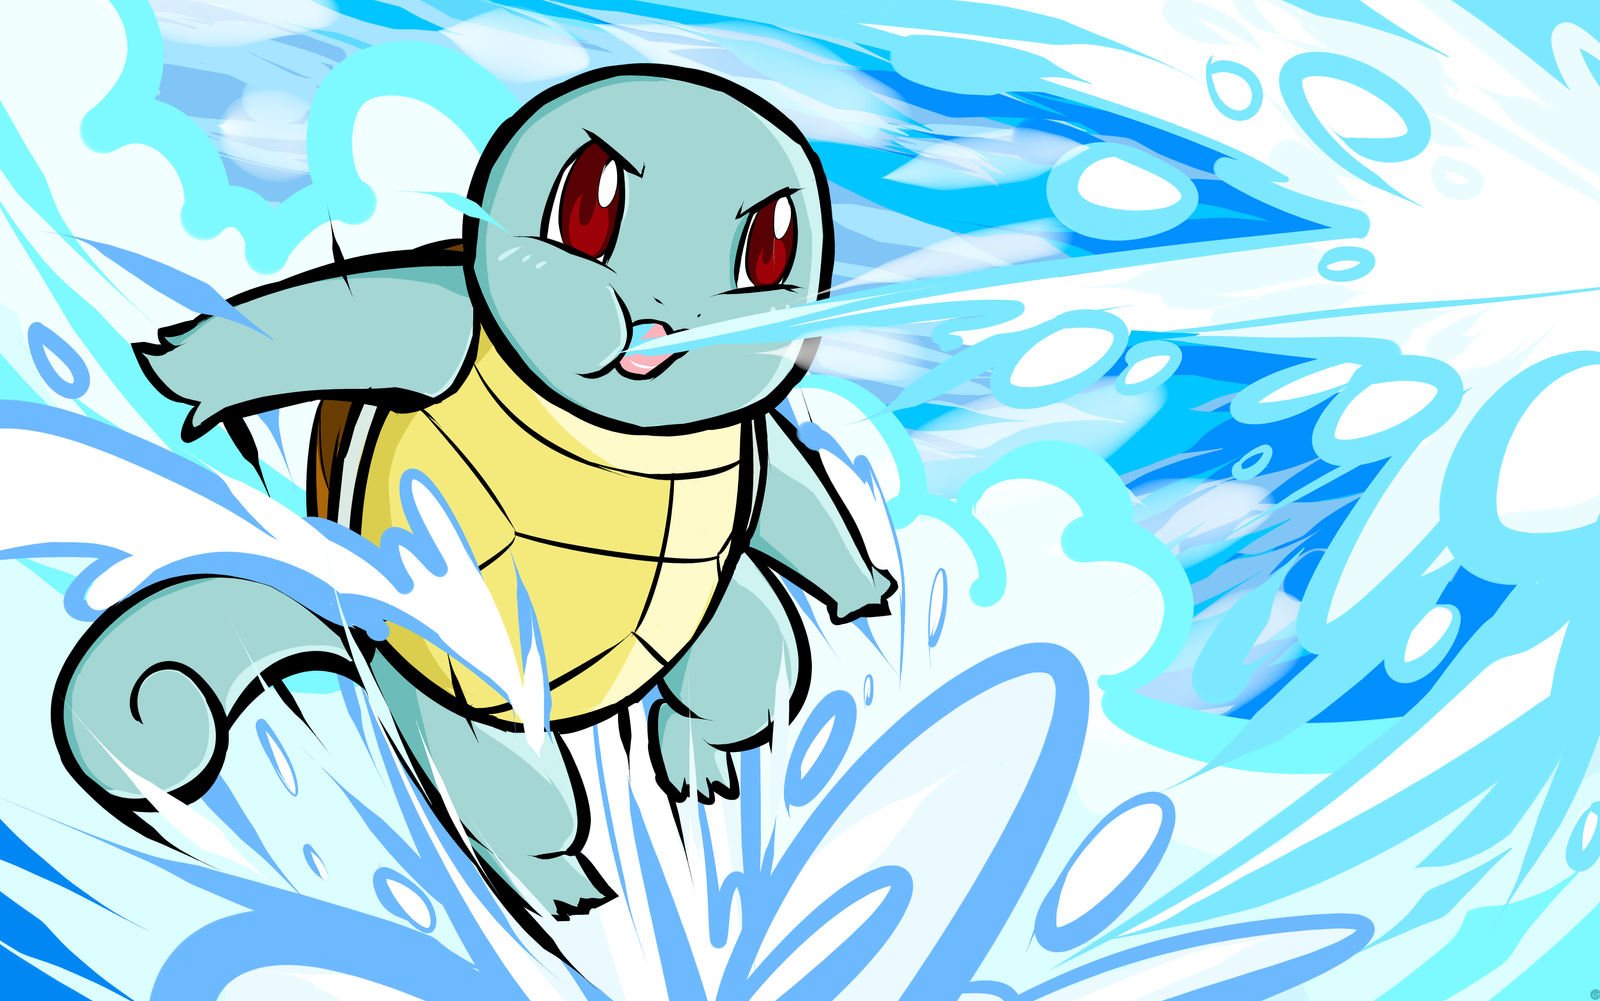 squirtle___bubble_by_ishmam_d7t1omx-fullview.jpg